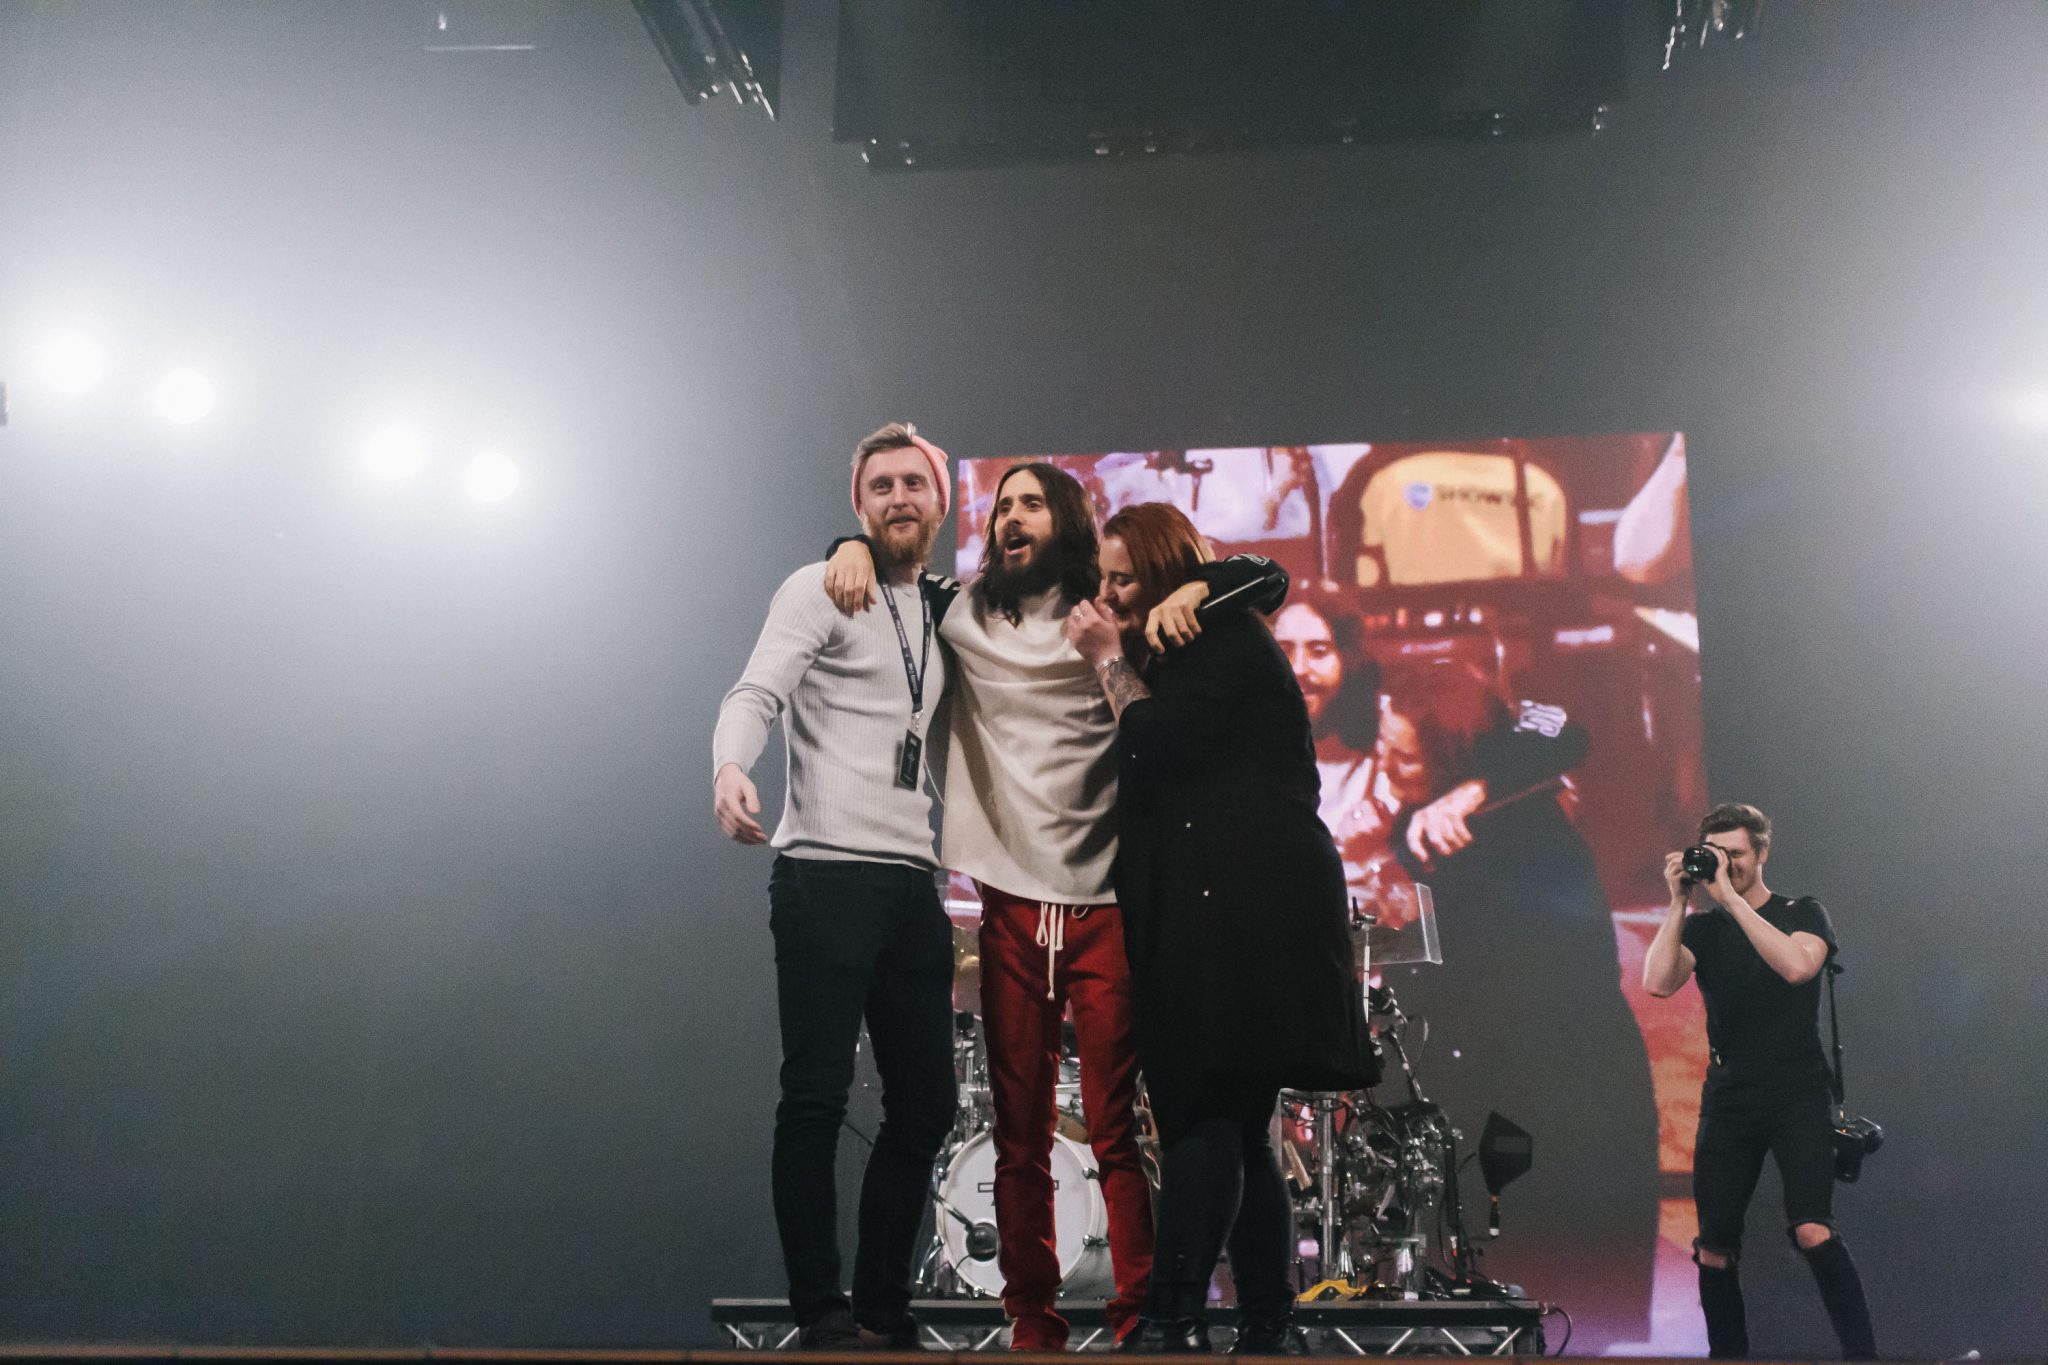 manchester london music photographer 30 seconds to mars monlolith tour